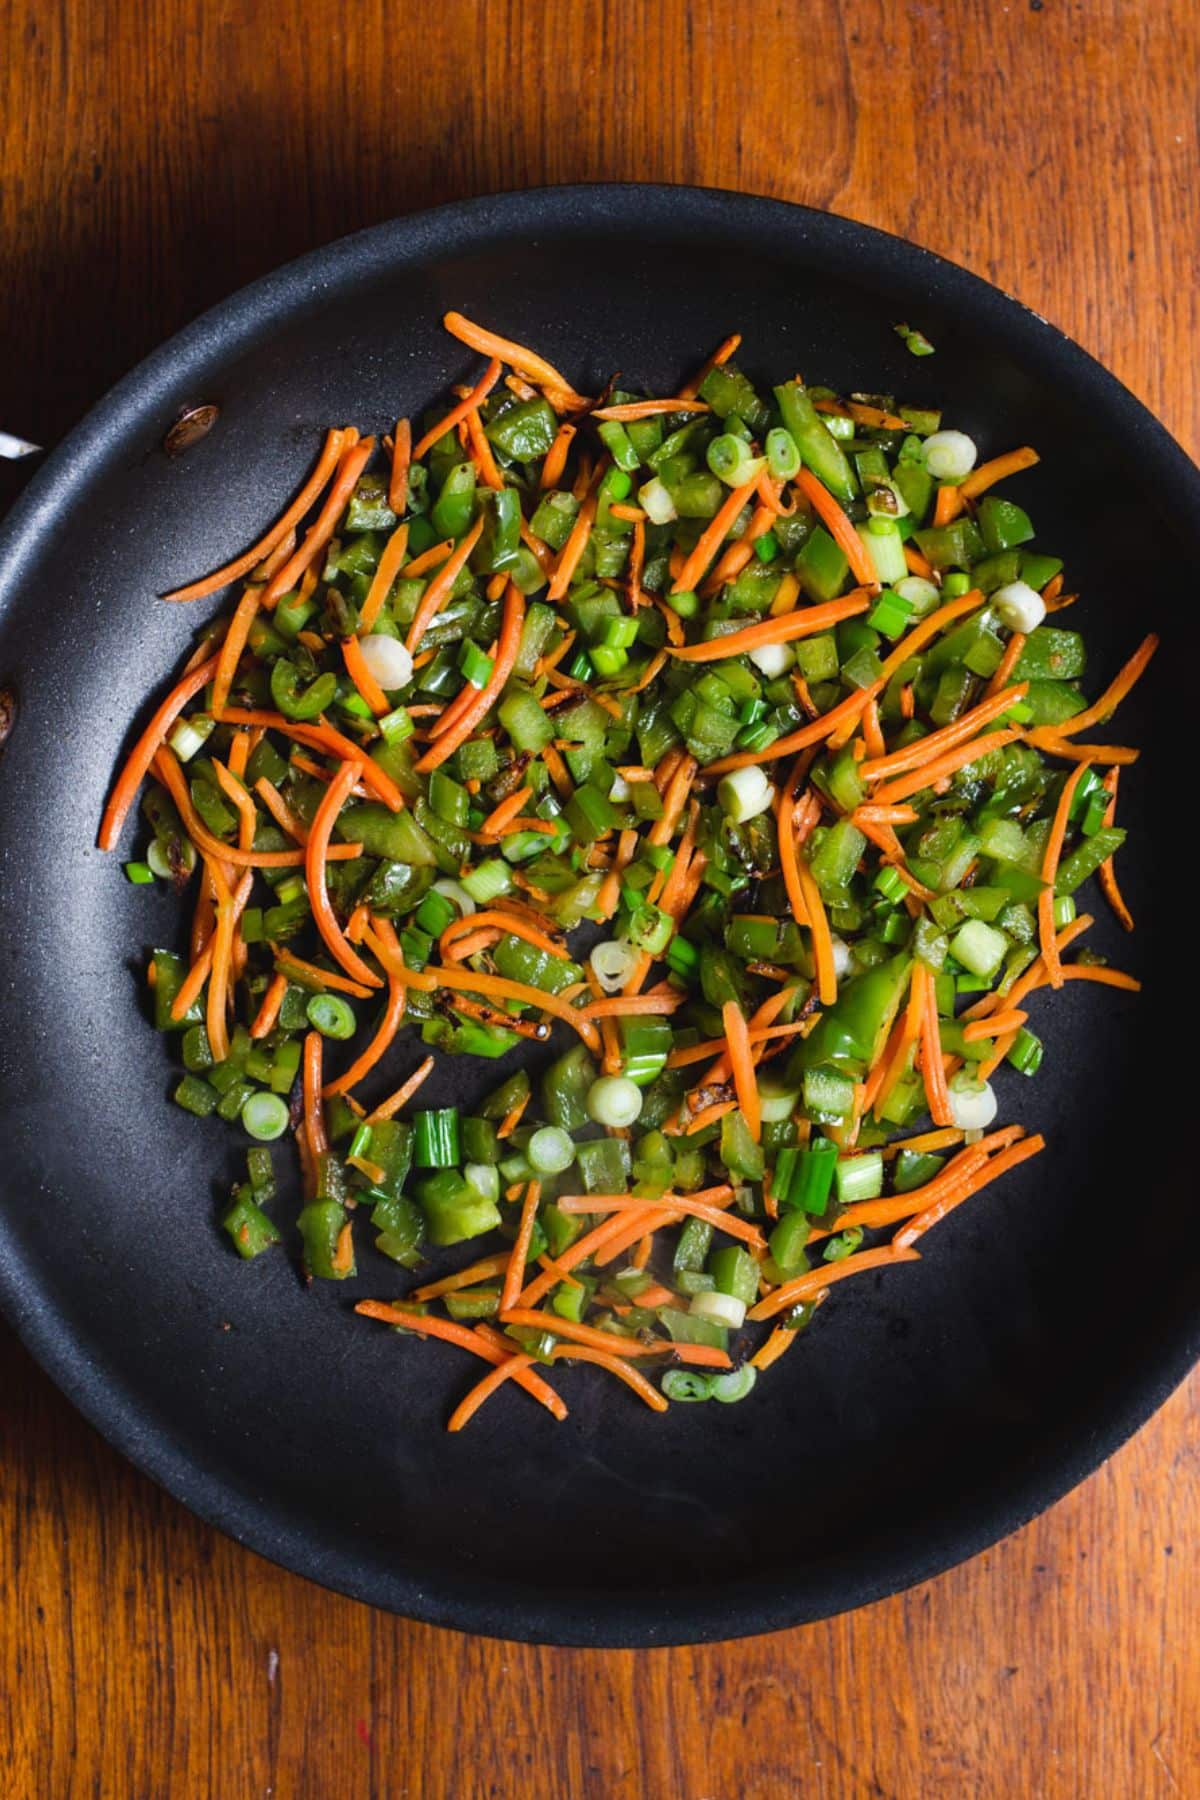 Matchstick carrots, green bell pepper, and green onions cooking in a black skillet.